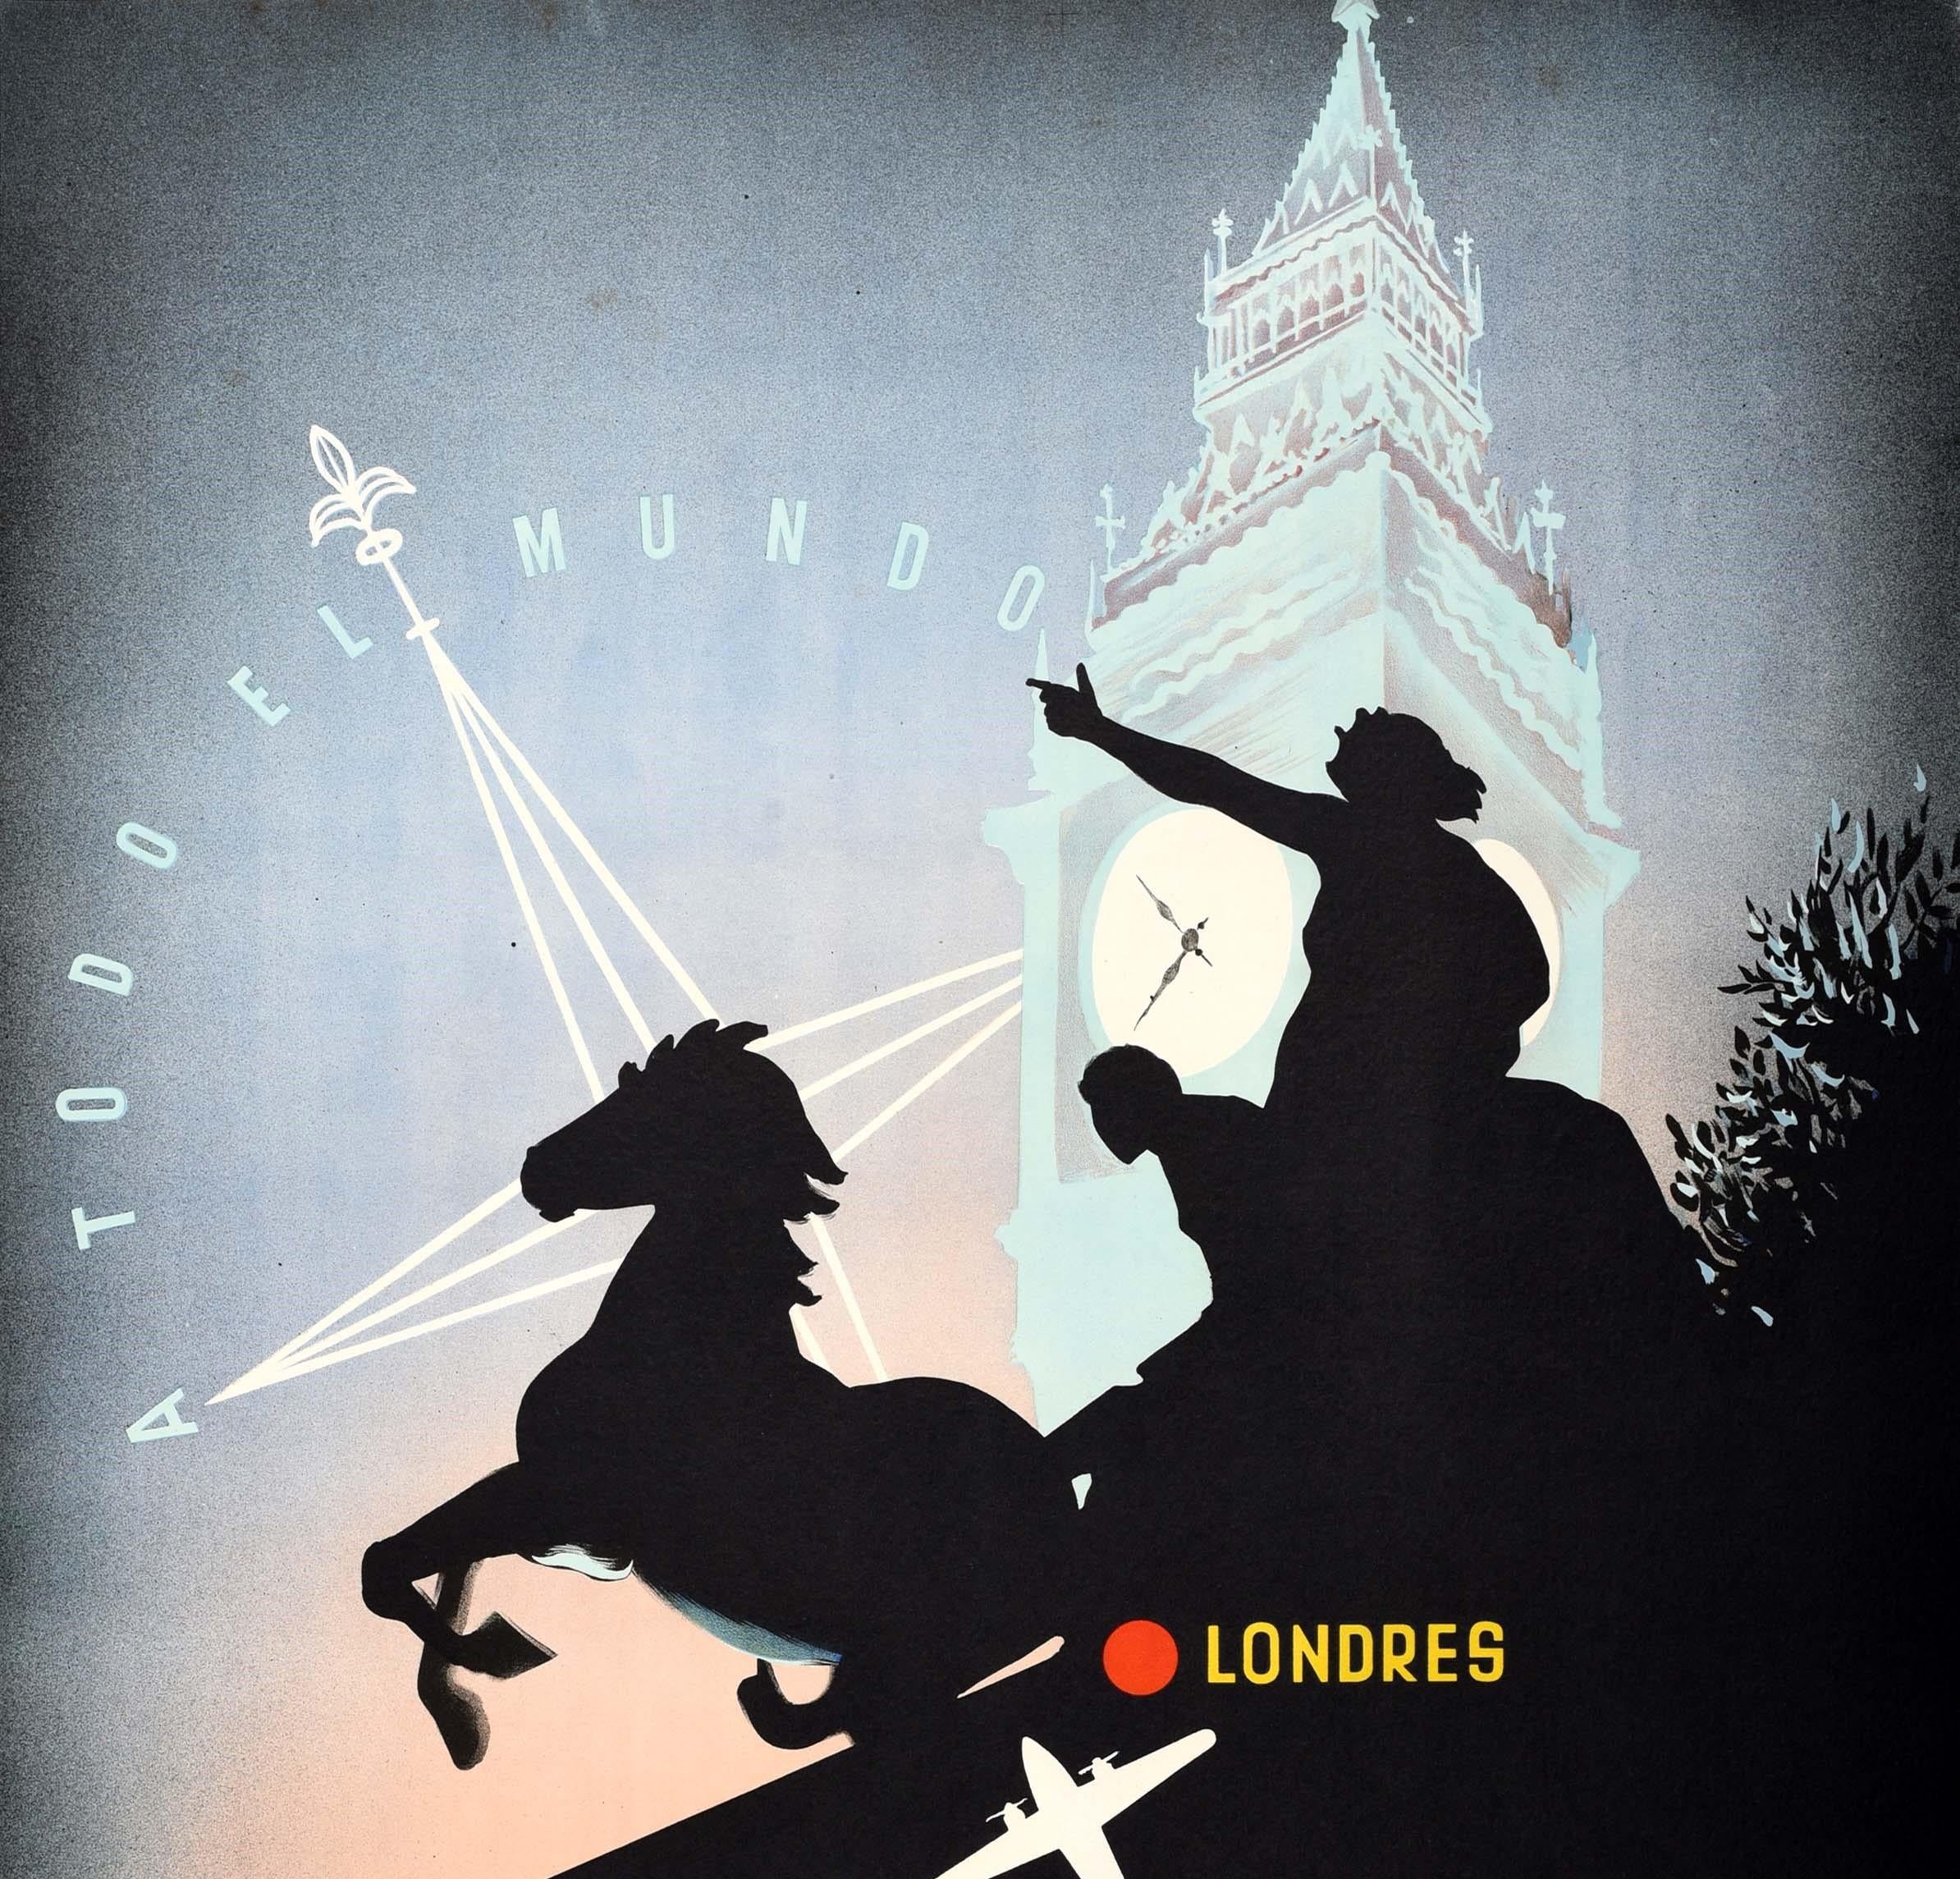 Original Vintage Airline Travel Poster Madrid To London BEA To The Whole World - Print by Leruy